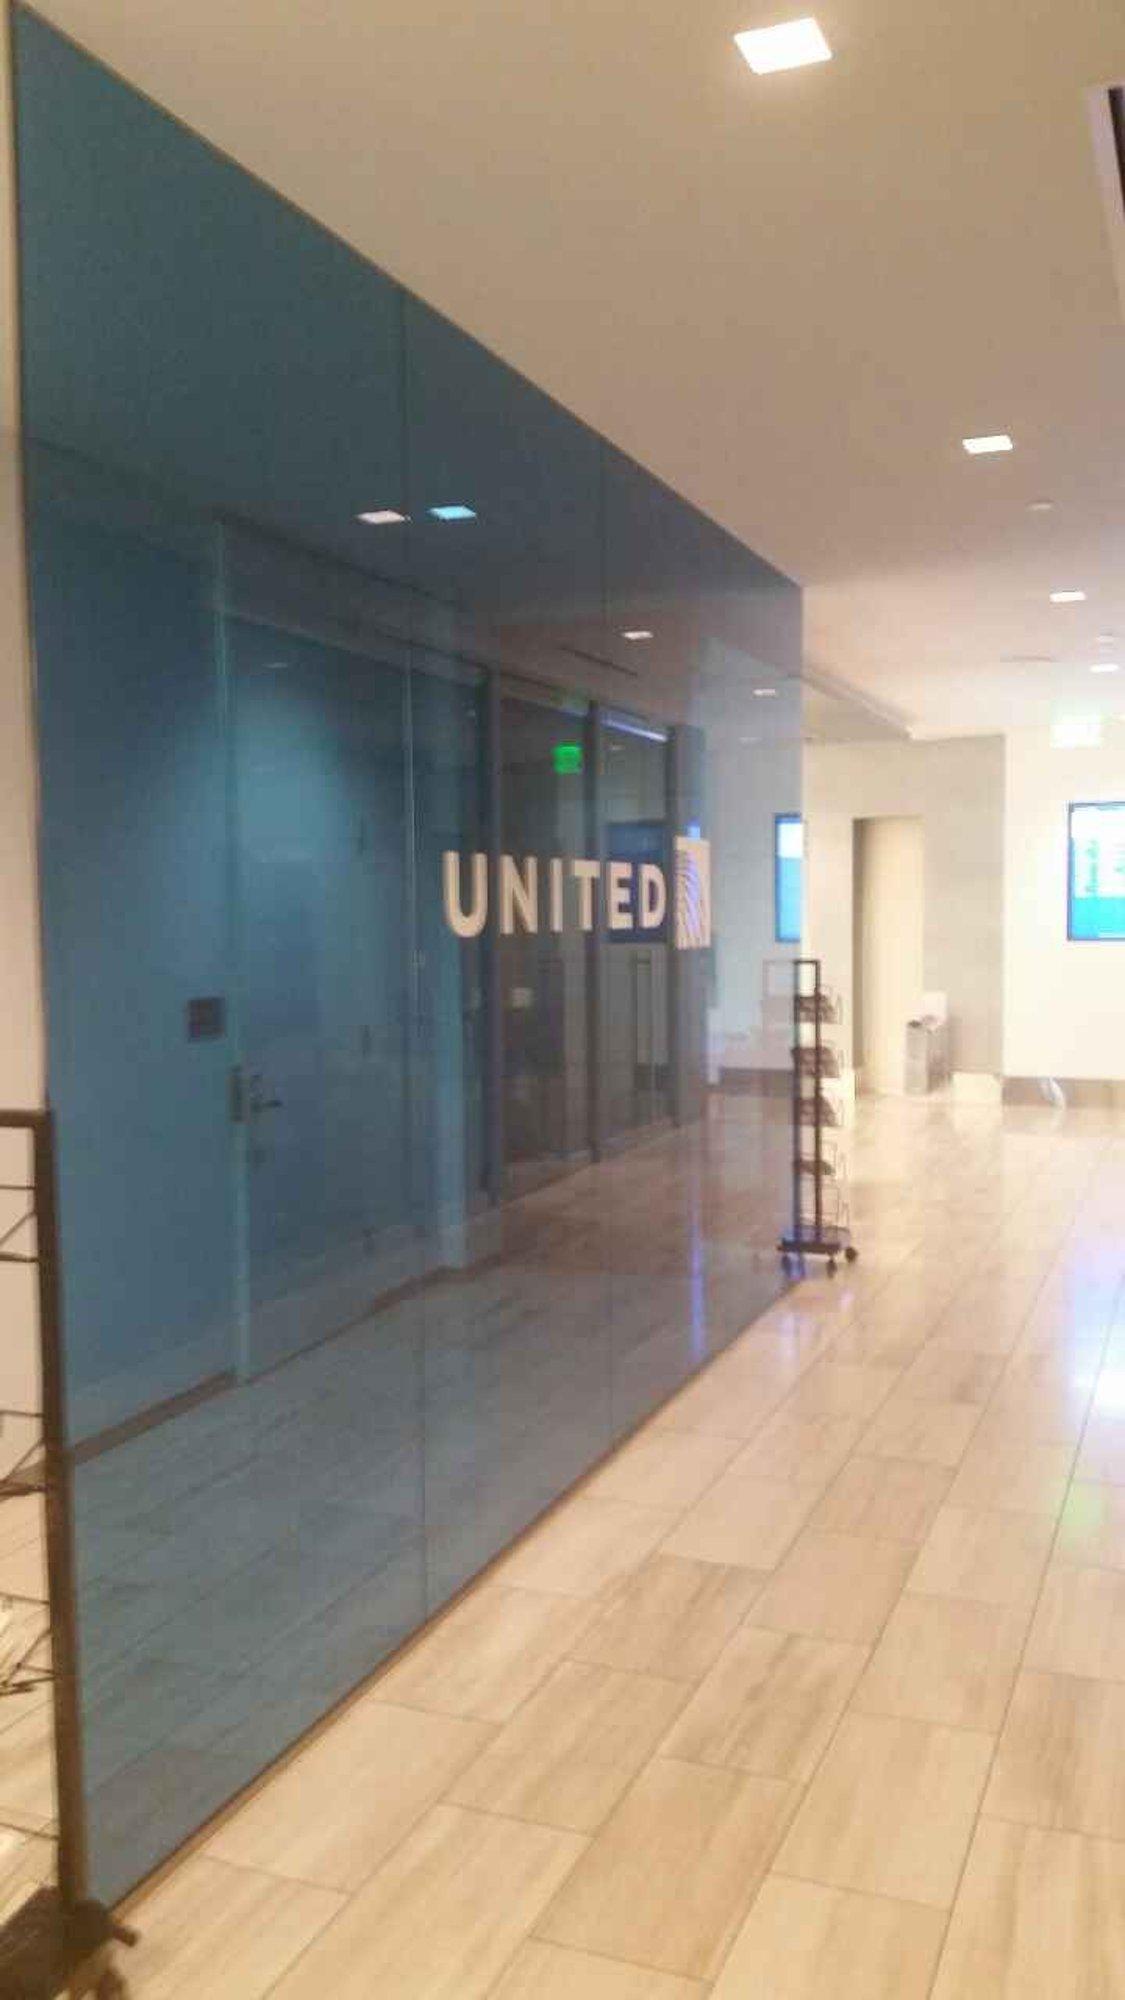 United Airlines United Club image 47 of 57